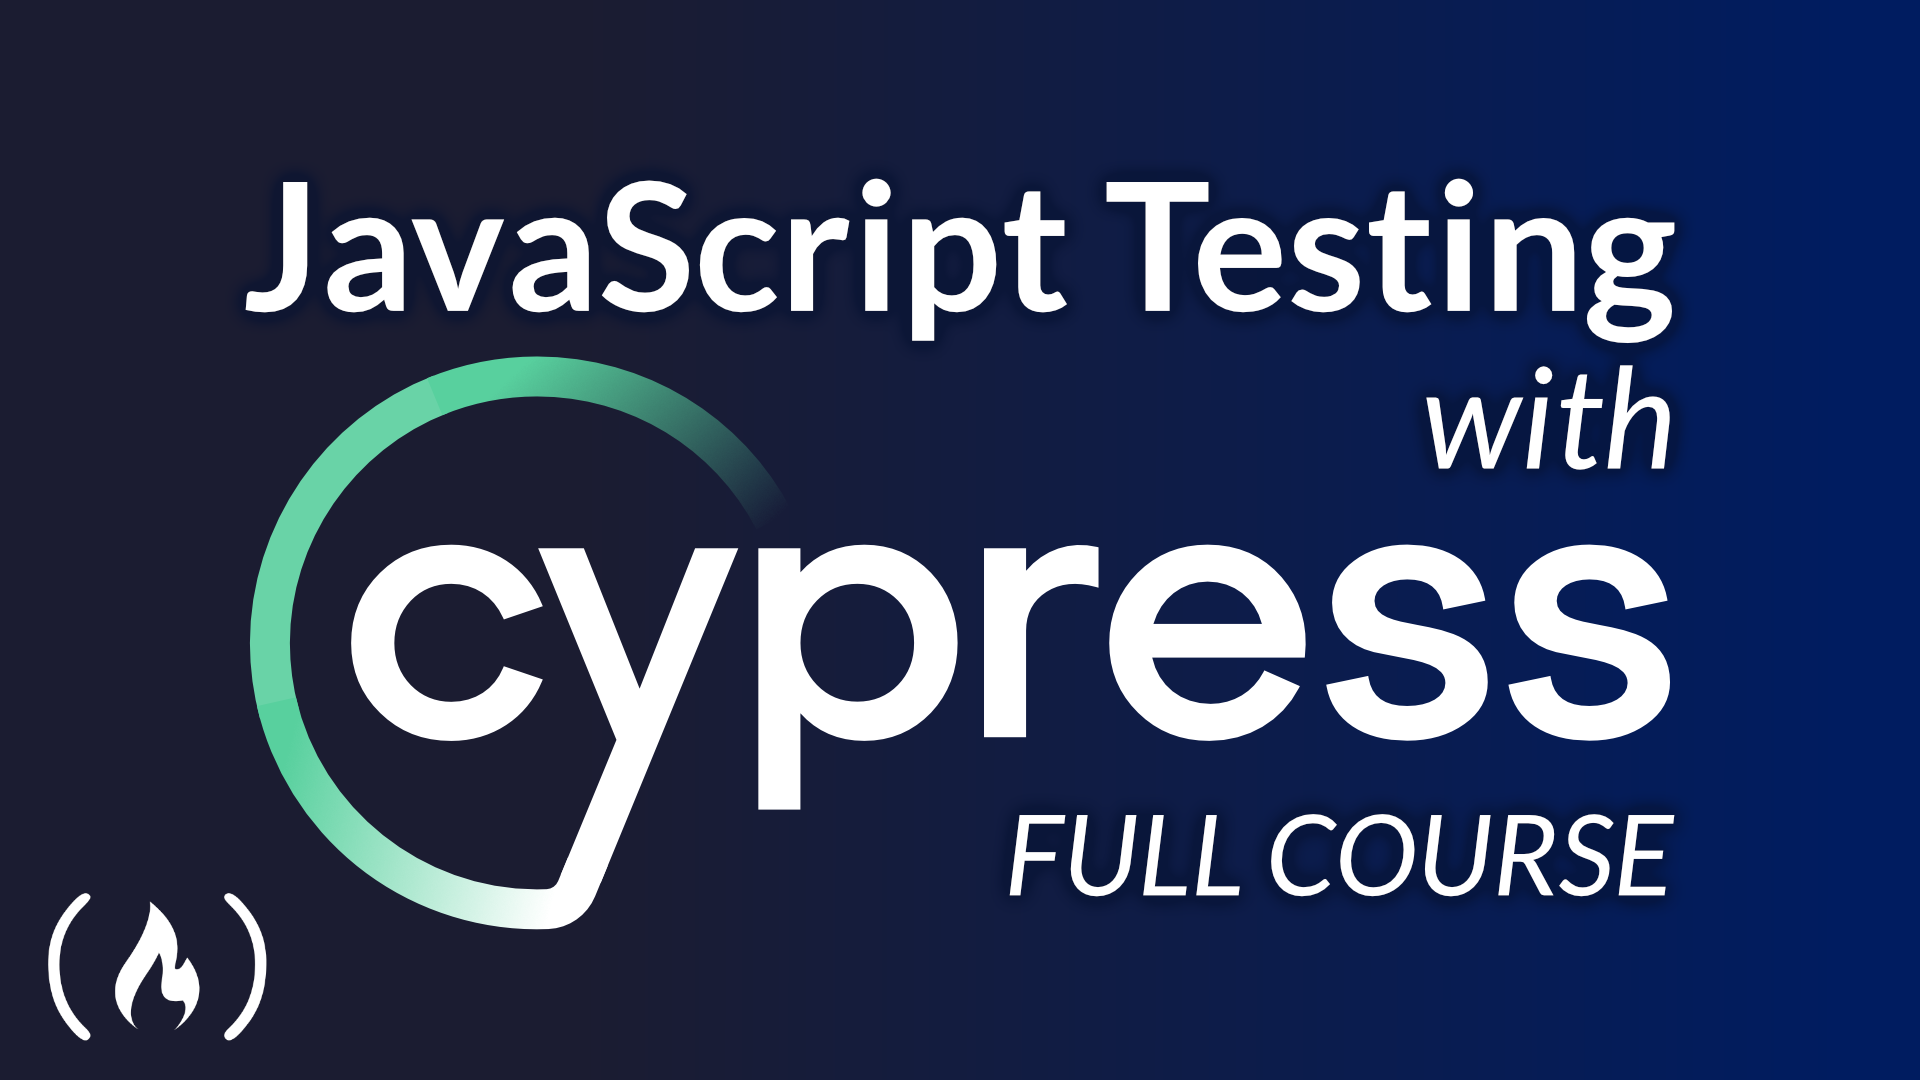 Learn End-to-End Testing with Cypress for JavaScript Applications